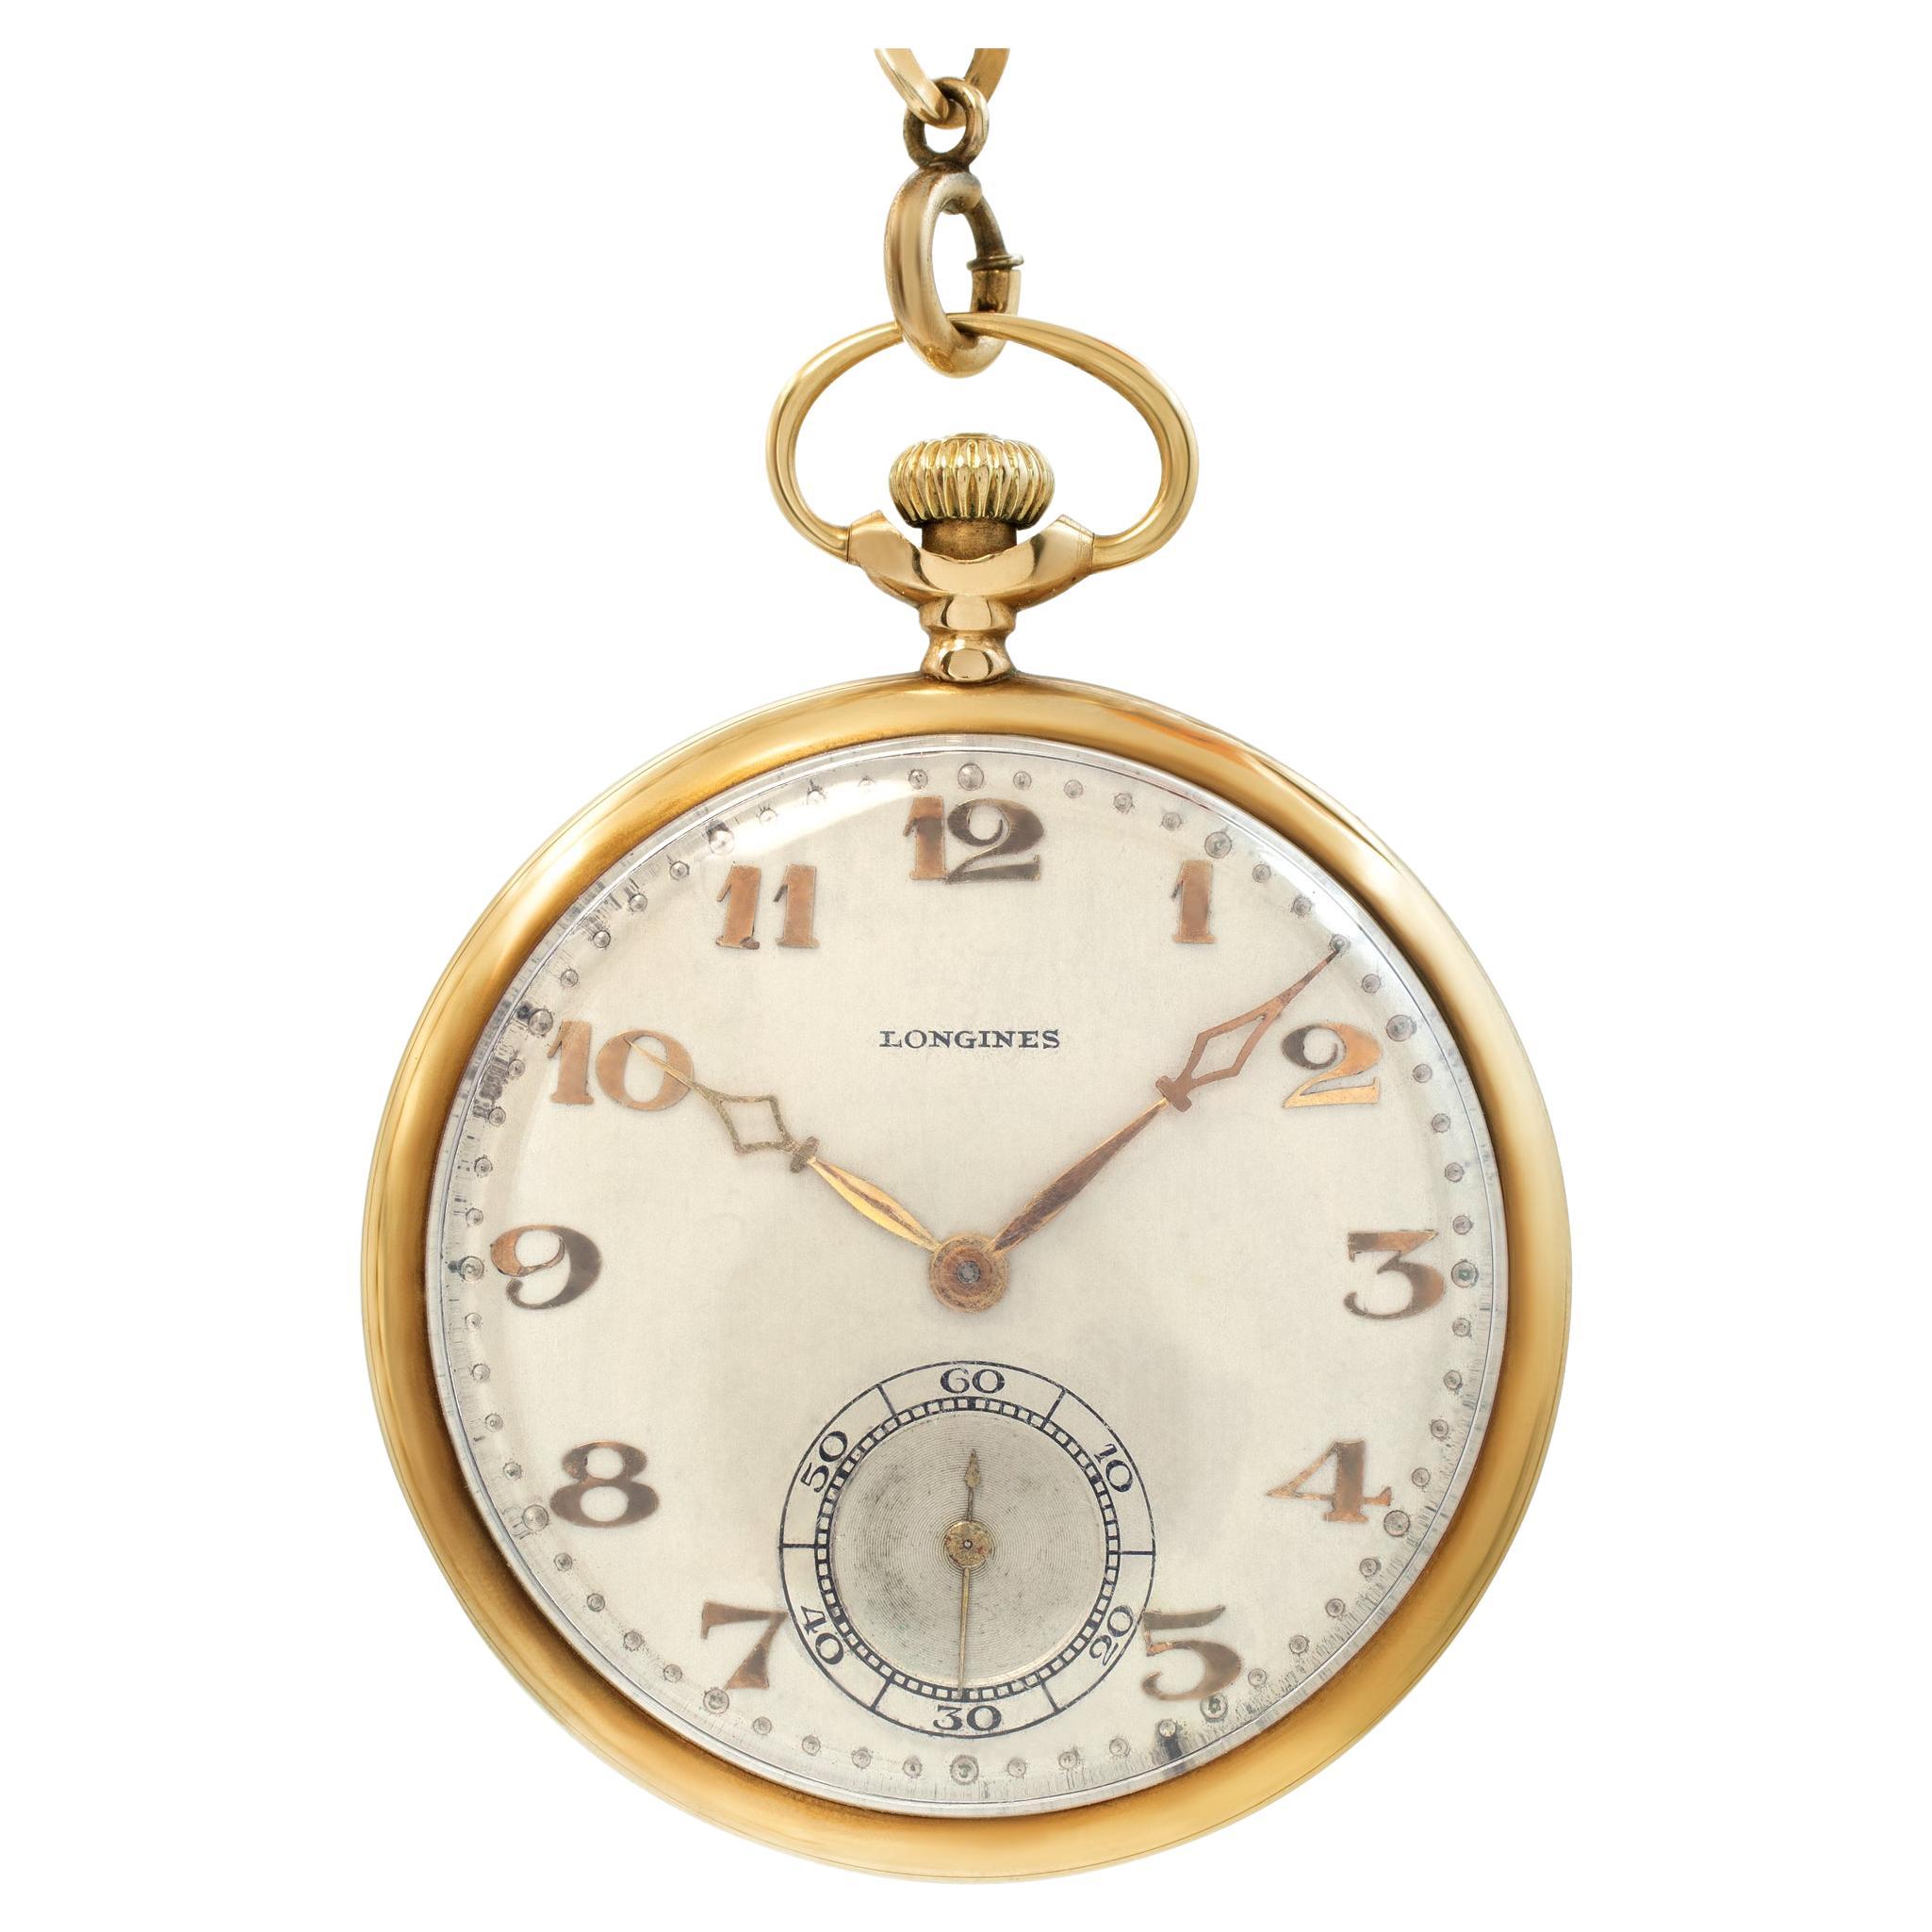 Longines in yellow gold with a silver dial 43mm Manual pocket watch